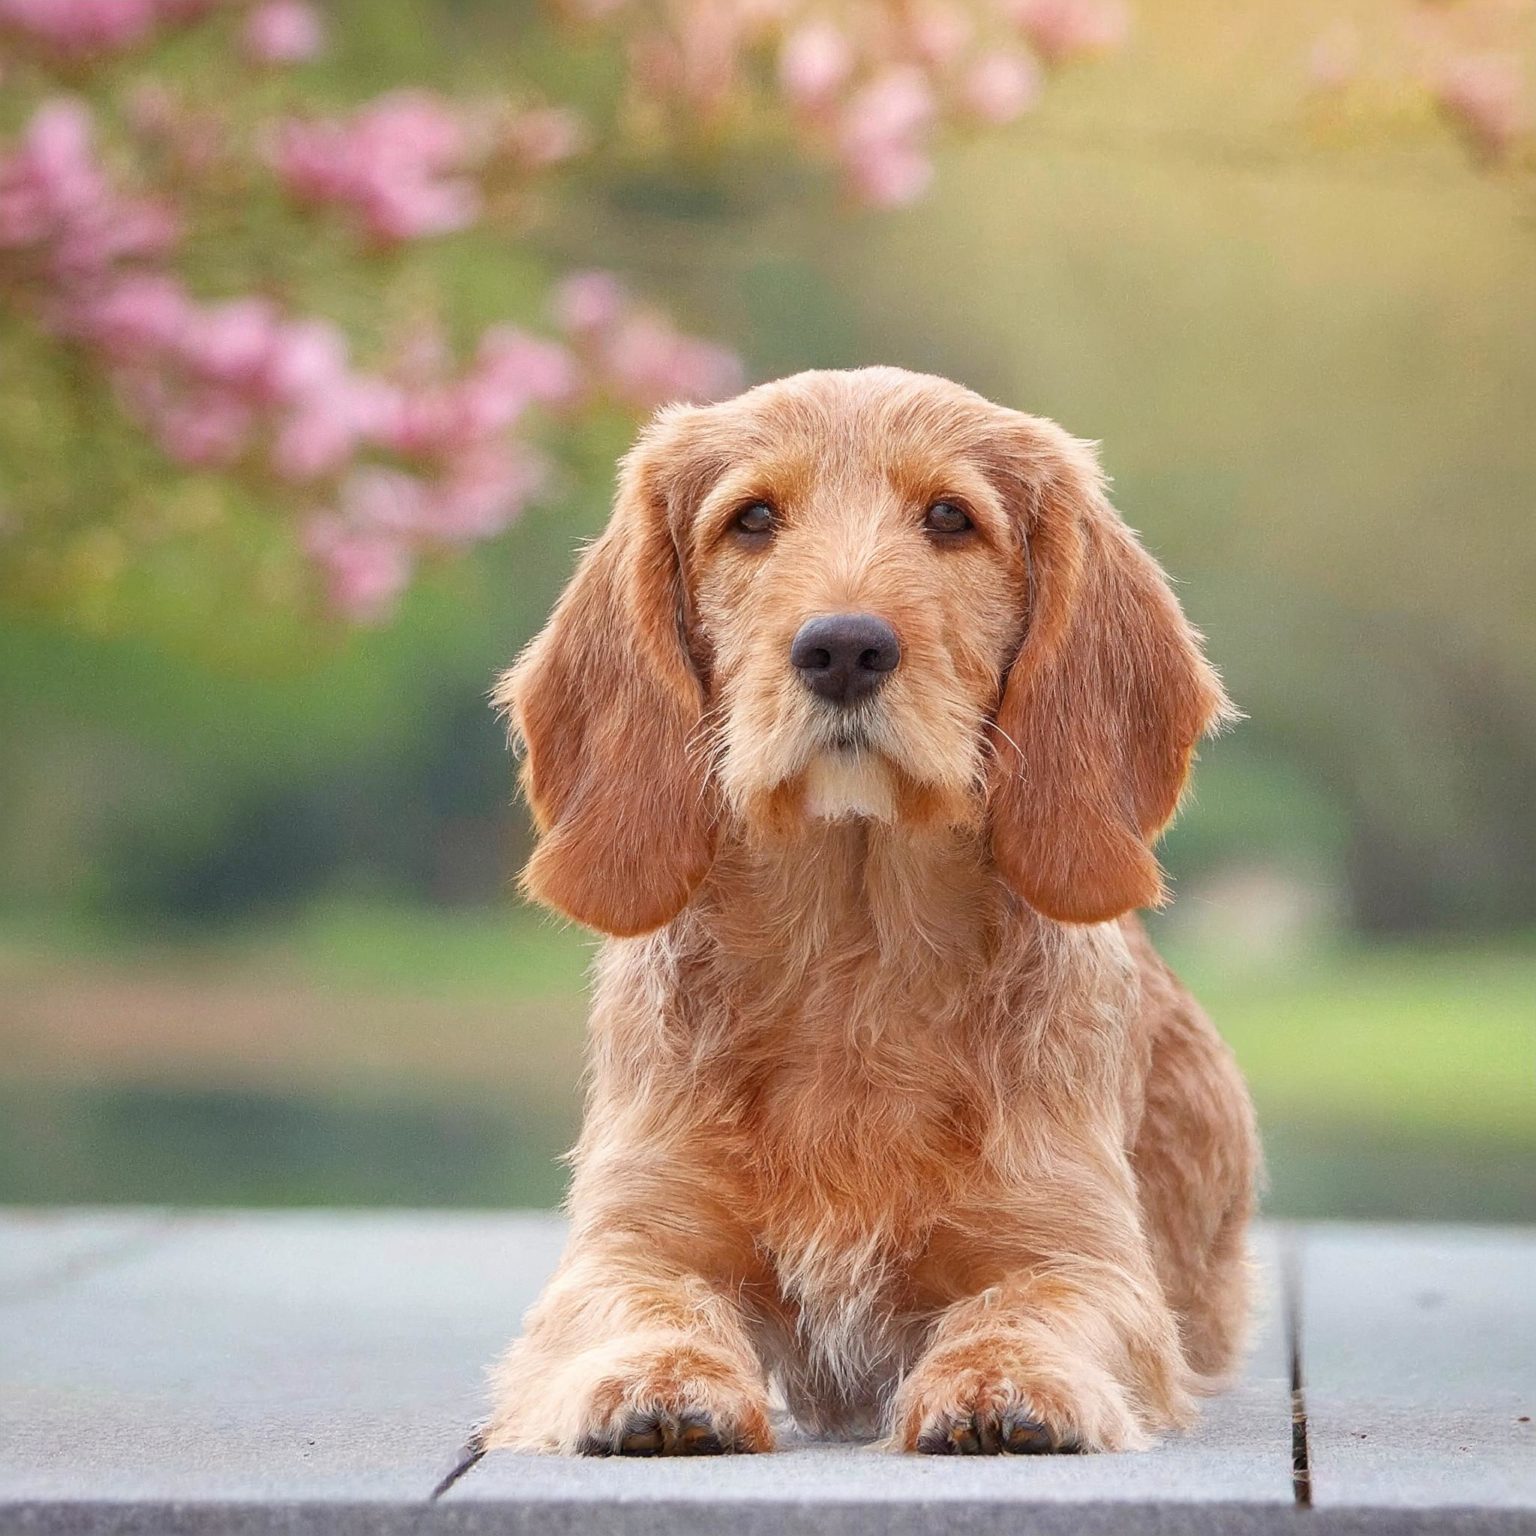 The Basset Fauve de Bretagne is a short-legged hunting breed of dog of the scent hound type, originally from Brittany, a historical duchy of France.